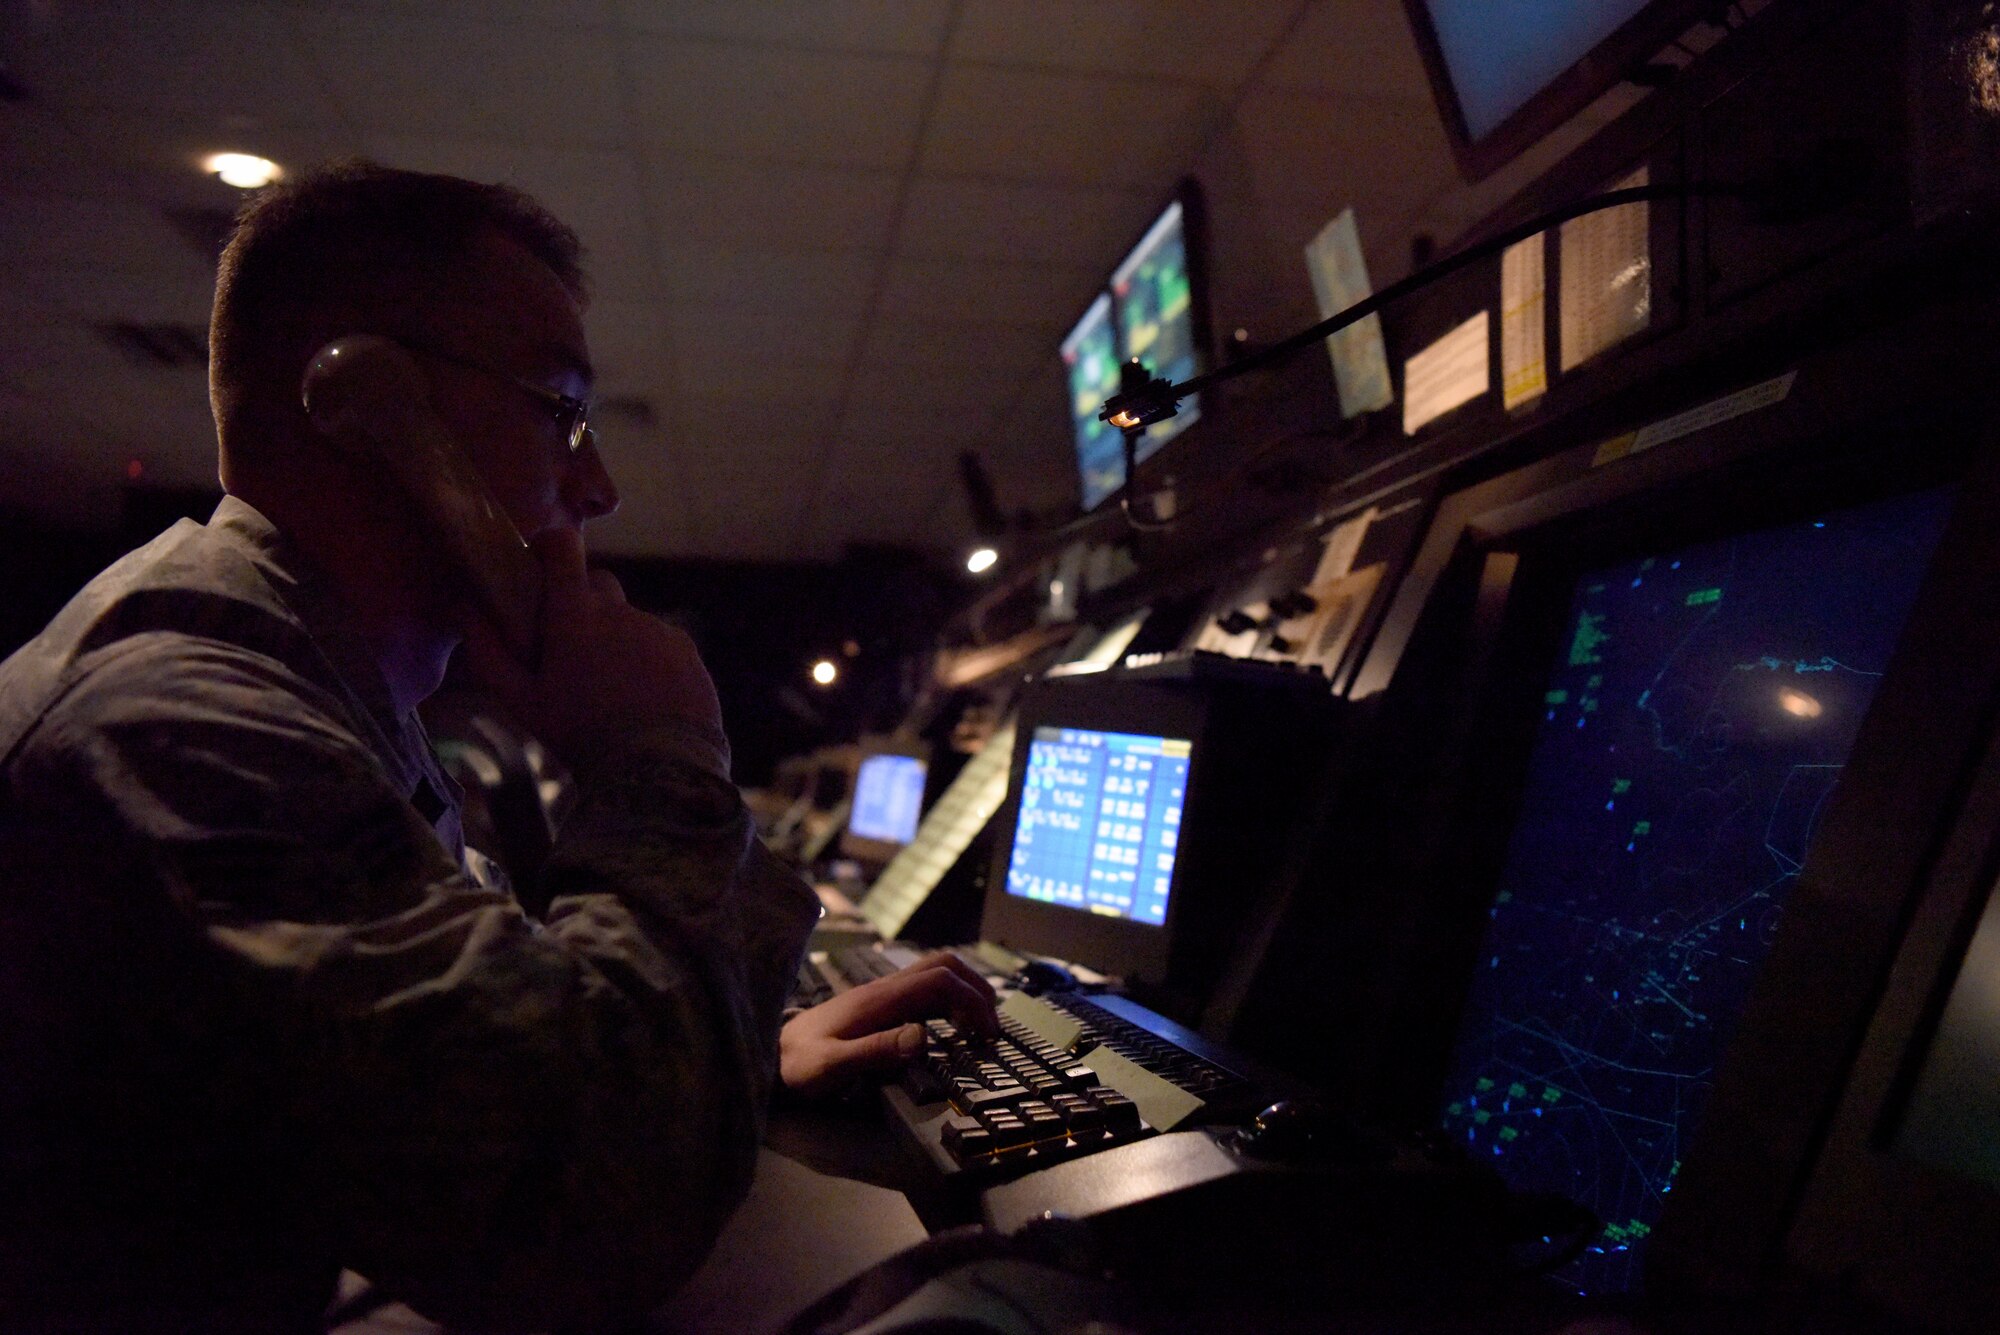 An Airman from the 48th Operations Support Squadron Radar Approach Control monitors air traffic around Royal Air Force Lakenheath, England, Oct. 03, 2018. Airmen from the Radar, Airfield and Weather Systems flight ensure that every sensor and piece of monitoring equipment is calibrated and accurate to provide RAPCON with a precise picture of the surrounding airspace.  (U.S. Air Force photo by Senior Airman John A. Crawford)